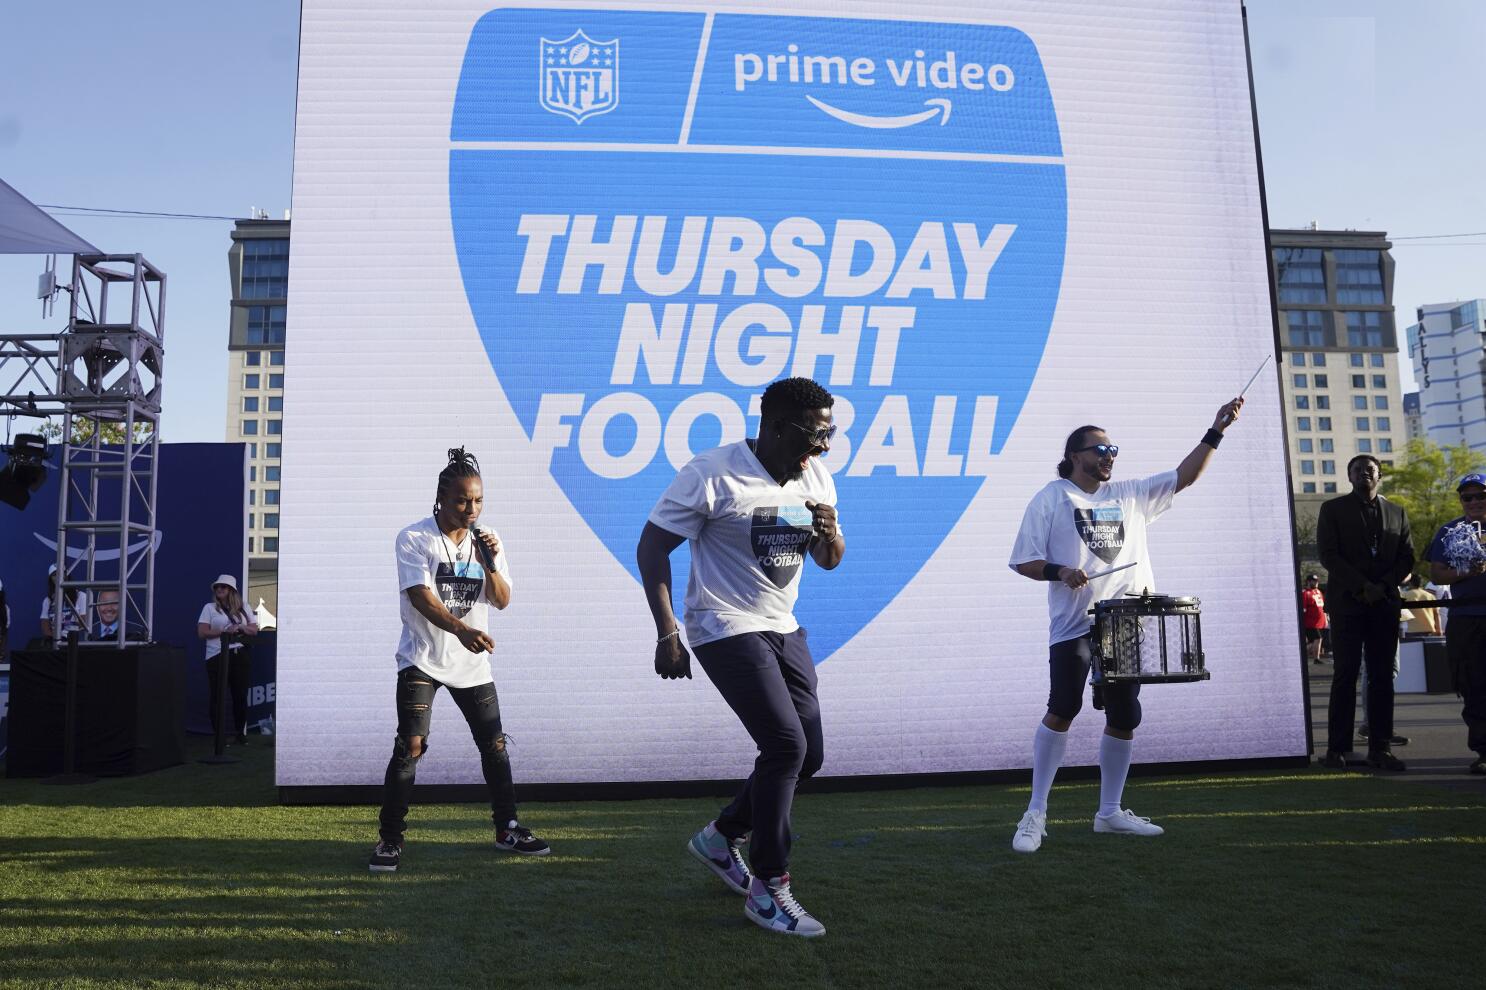 Opinion: Making fans pay  for NFL football games is un-American - The  San Diego Union-Tribune